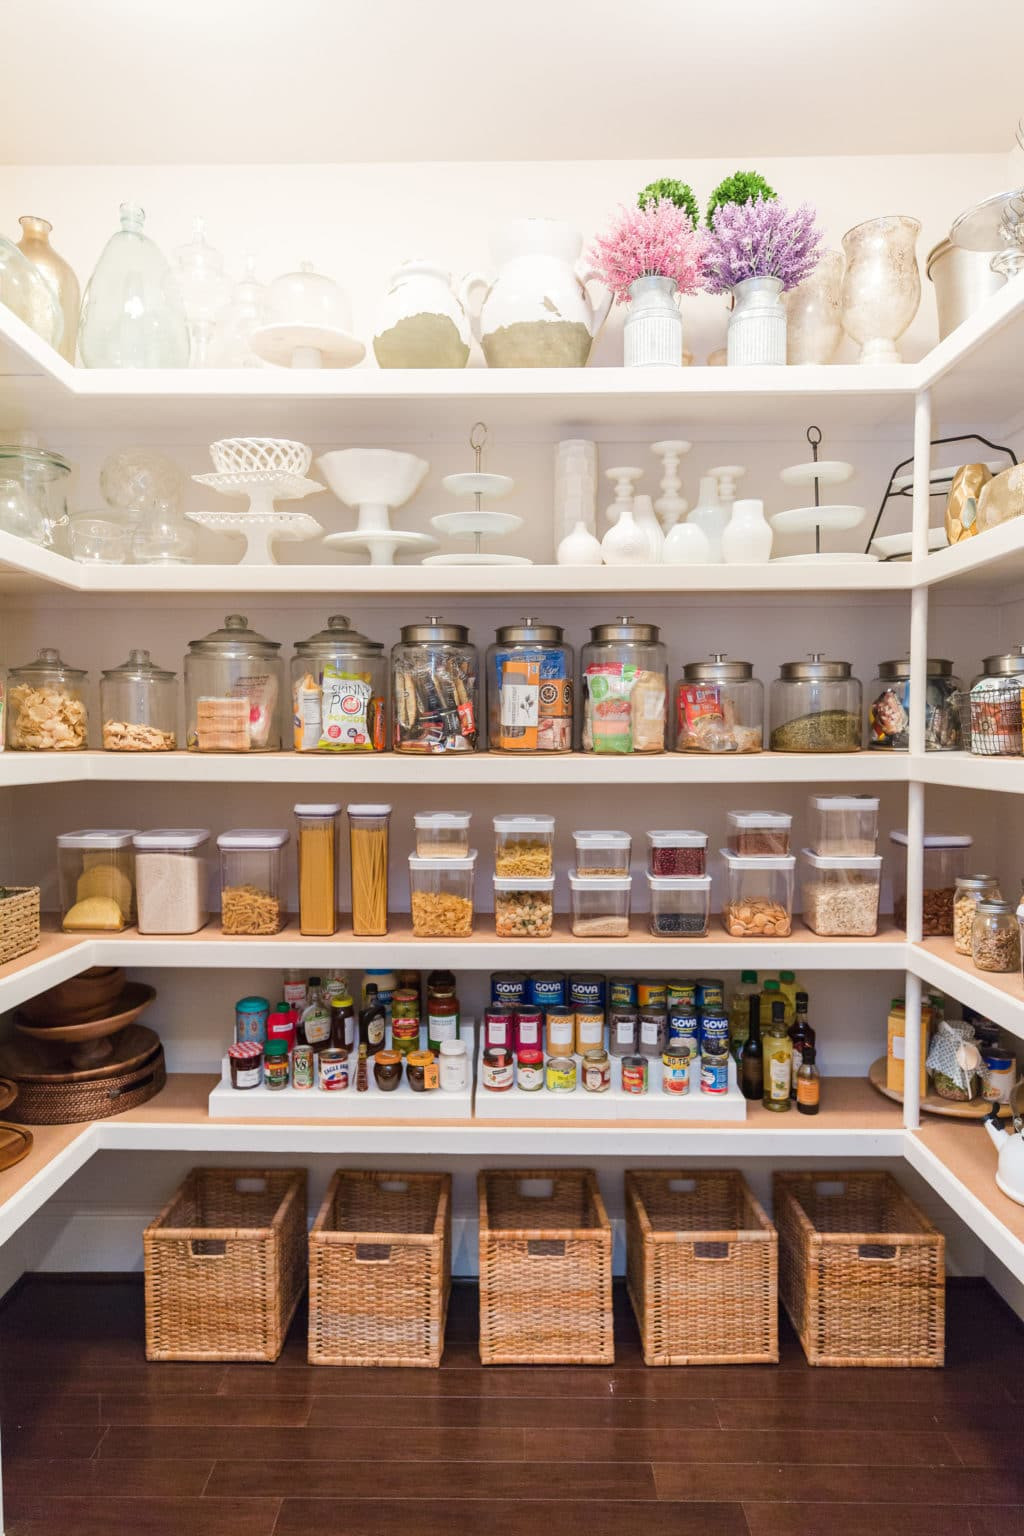 Kitchen Pantry Organize
 10 Clever Ways to Keep an Organized Pantry